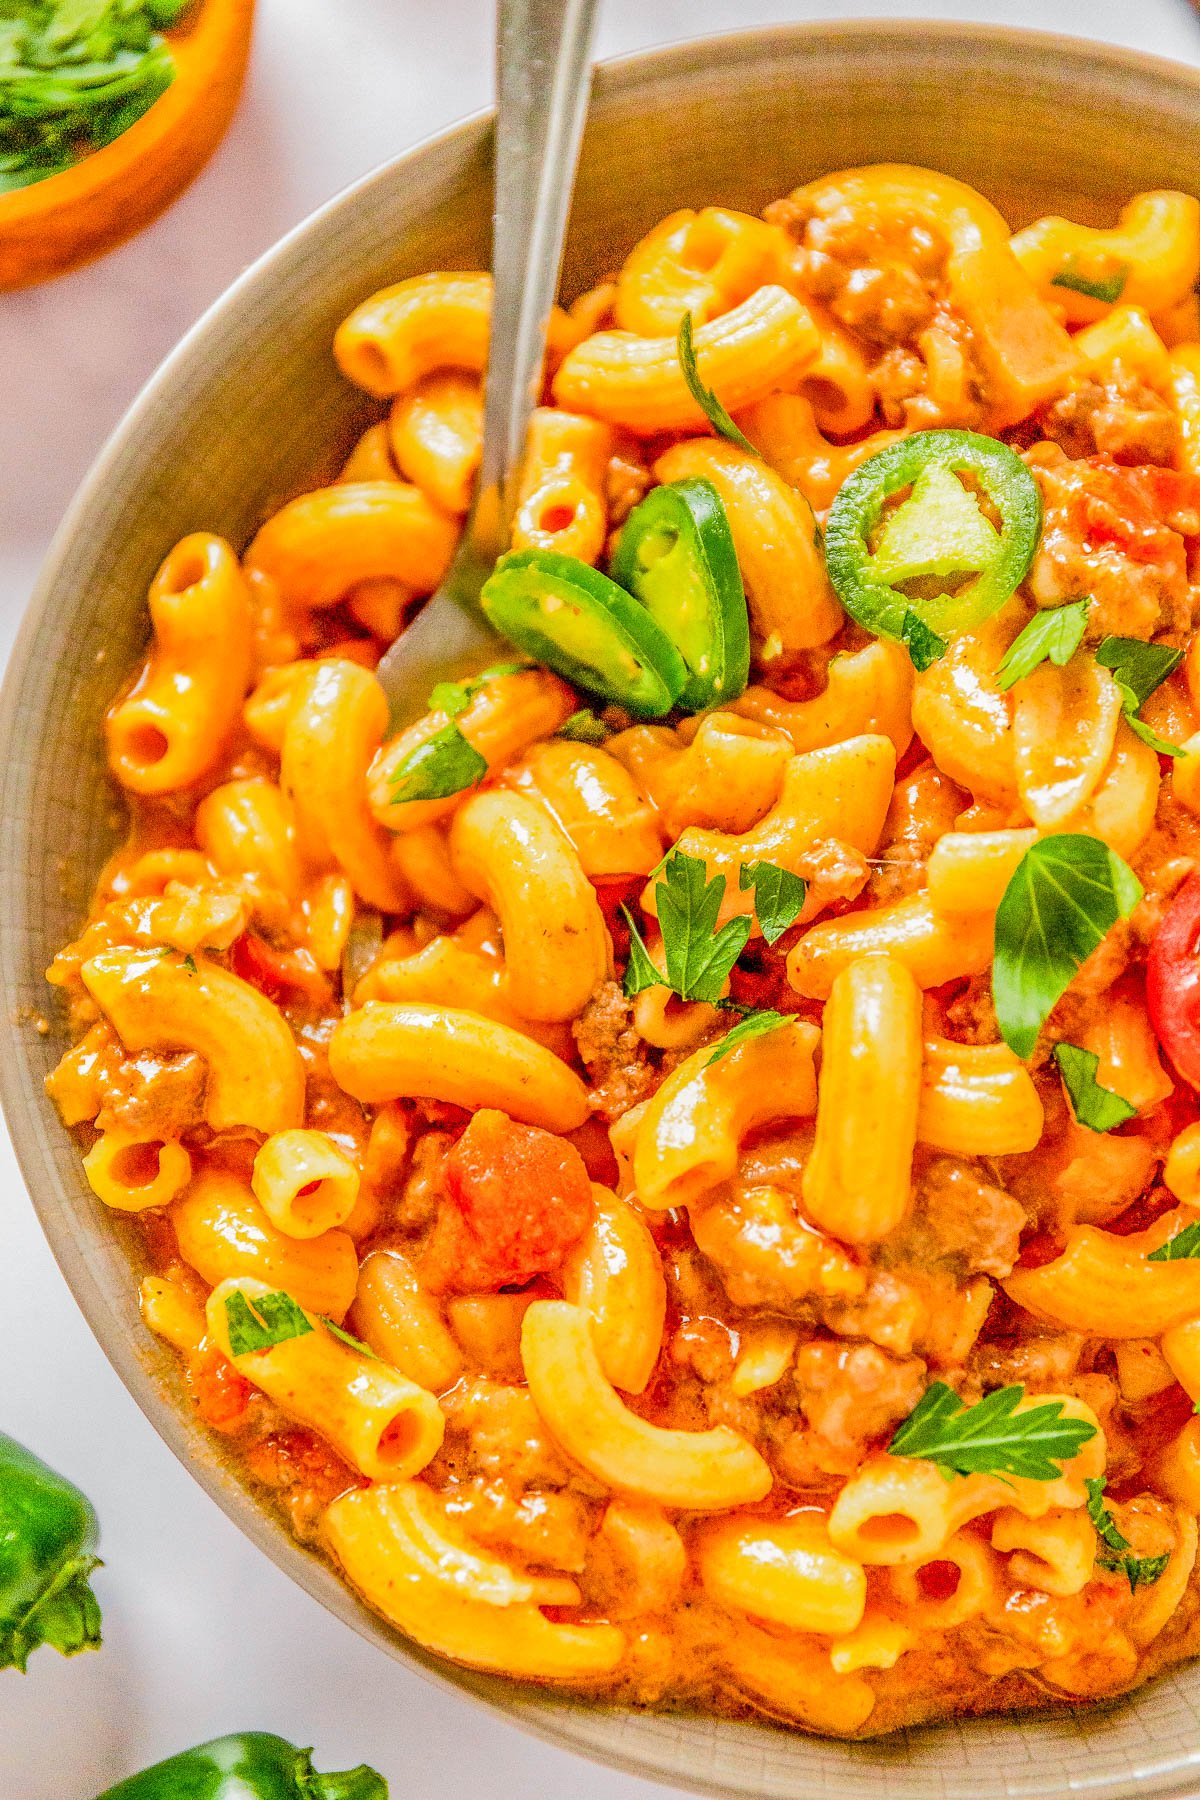 A bowl of macaroni pasta with tomato sauce, ground meat, sliced green bell peppers, and garnished with parsley.